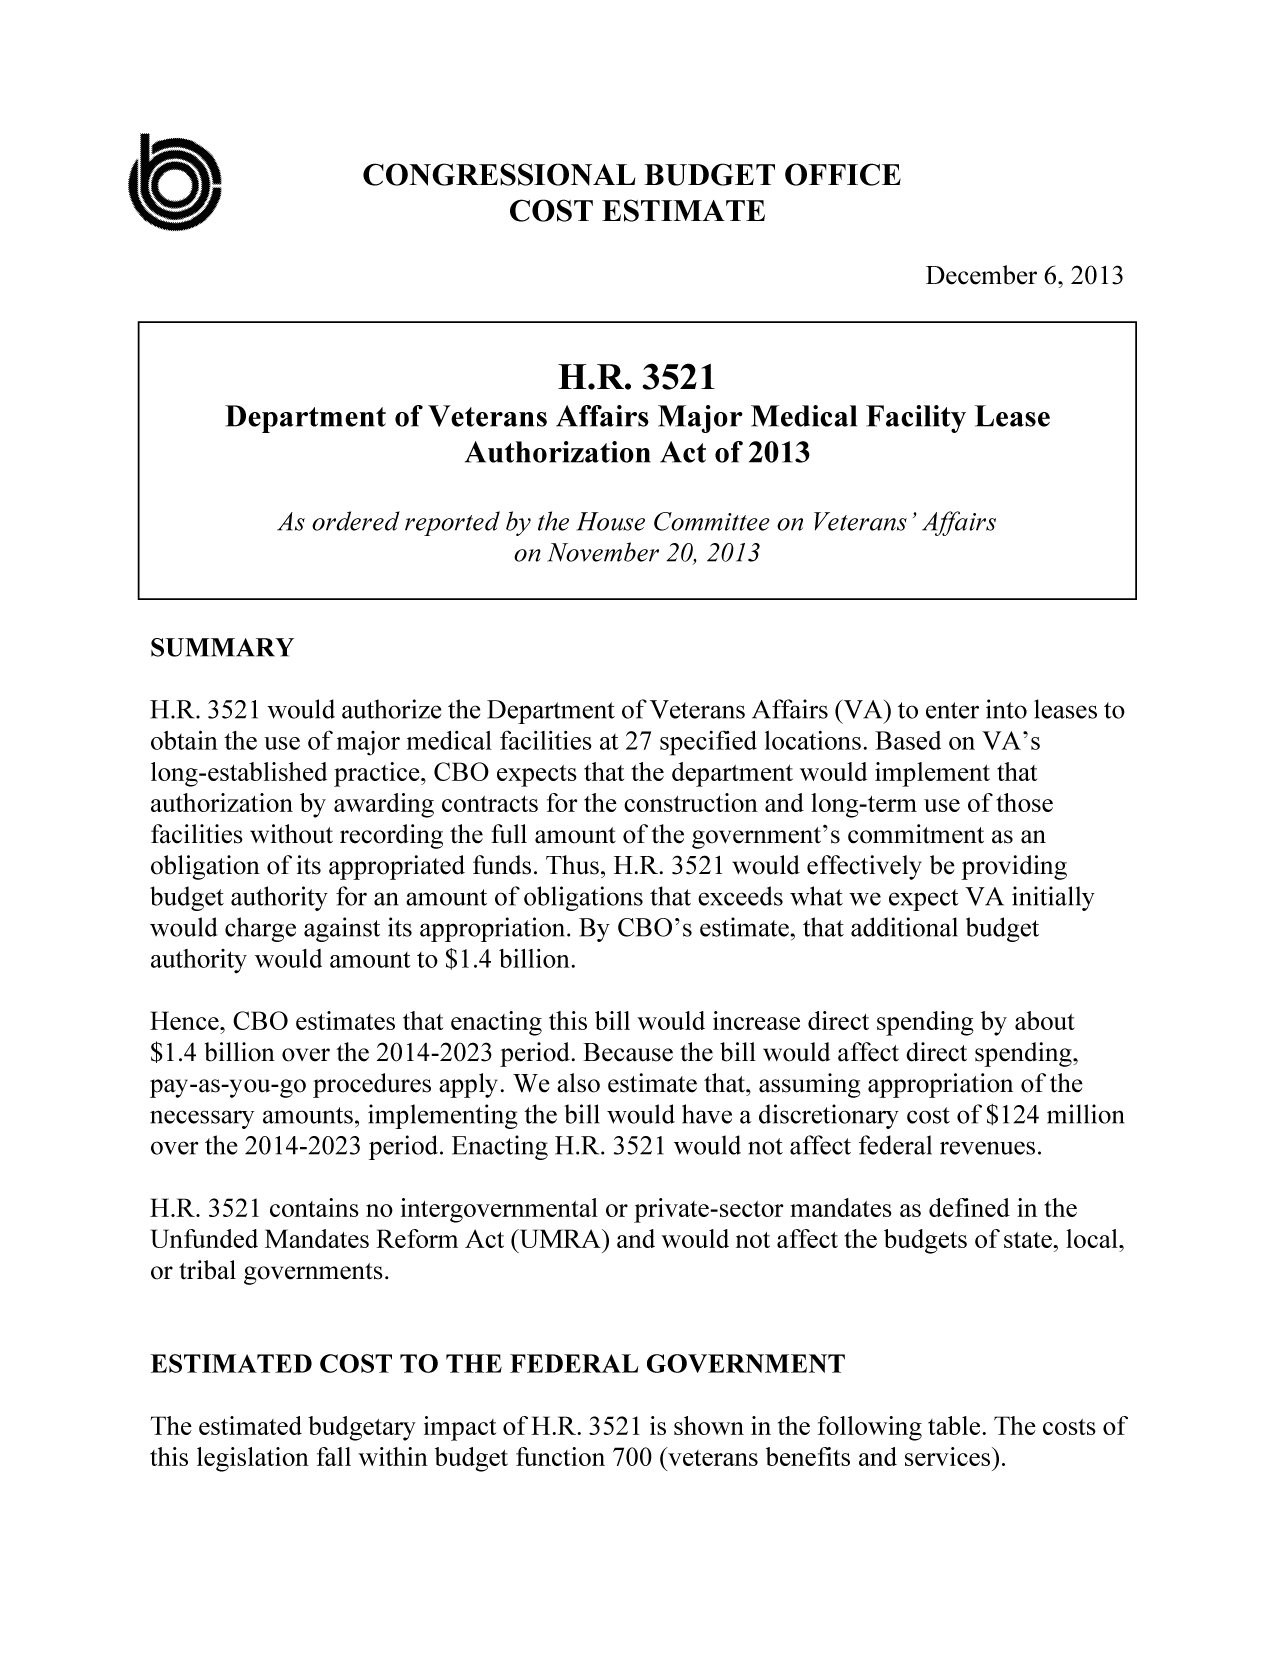 handle is hein.congrec/cbo11419 and id is 1 raw text is: CONGRESSIONAL BUDGET OFFICE
COST ESTIMATE
December 6, 2013
H.R. 3521
Department of Veterans Affairs Major Medical Facility Lease
Authorization Act of 2013
As ordered reported by the House Committee on Veterans'Affairs
on November 20, 2013
SUMMARY
H.R. 3521 would authorize the Department of Veterans Affairs (VA) to enter into leases to
obtain the use of major medical facilities at 27 specified locations. Based on VA's
long-established practice, CBO expects that the department would implement that
authorization by awarding contracts for the construction and long-term use of those
facilities without recording the full amount of the government's commitment as an
obligation of its appropriated funds. Thus, H.R. 3521 would effectively be providing
budget authority for an amount of obligations that exceeds what we expect VA initially
would charge against its appropriation. By CBO's estimate, that additional budget
authority would amount to $1.4 billion.
Hence, CBO estimates that enacting this bill would increase direct spending by about
$1.4 billion over the 2014-2023 period. Because the bill would affect direct spending,
pay-as-you-go procedures apply. We also estimate that, assuming appropriation of the
necessary amounts, implementing the bill would have a discretionary cost of $124 million
over the 2014-2023 period. Enacting H.R. 3521 would not affect federal revenues.
H.R. 3521 contains no intergovernmental or private-sector mandates as defined in the
Unfunded Mandates Reform Act (UMRA) and would not affect the budgets of state, local,
or tribal governments.
ESTIMATED COST TO THE FEDERAL GOVERNMENT
The estimated budgetary impact of H.R. 3521 is shown in the following table. The costs of
this legislation fall within budget function 700 (veterans benefits and services).


